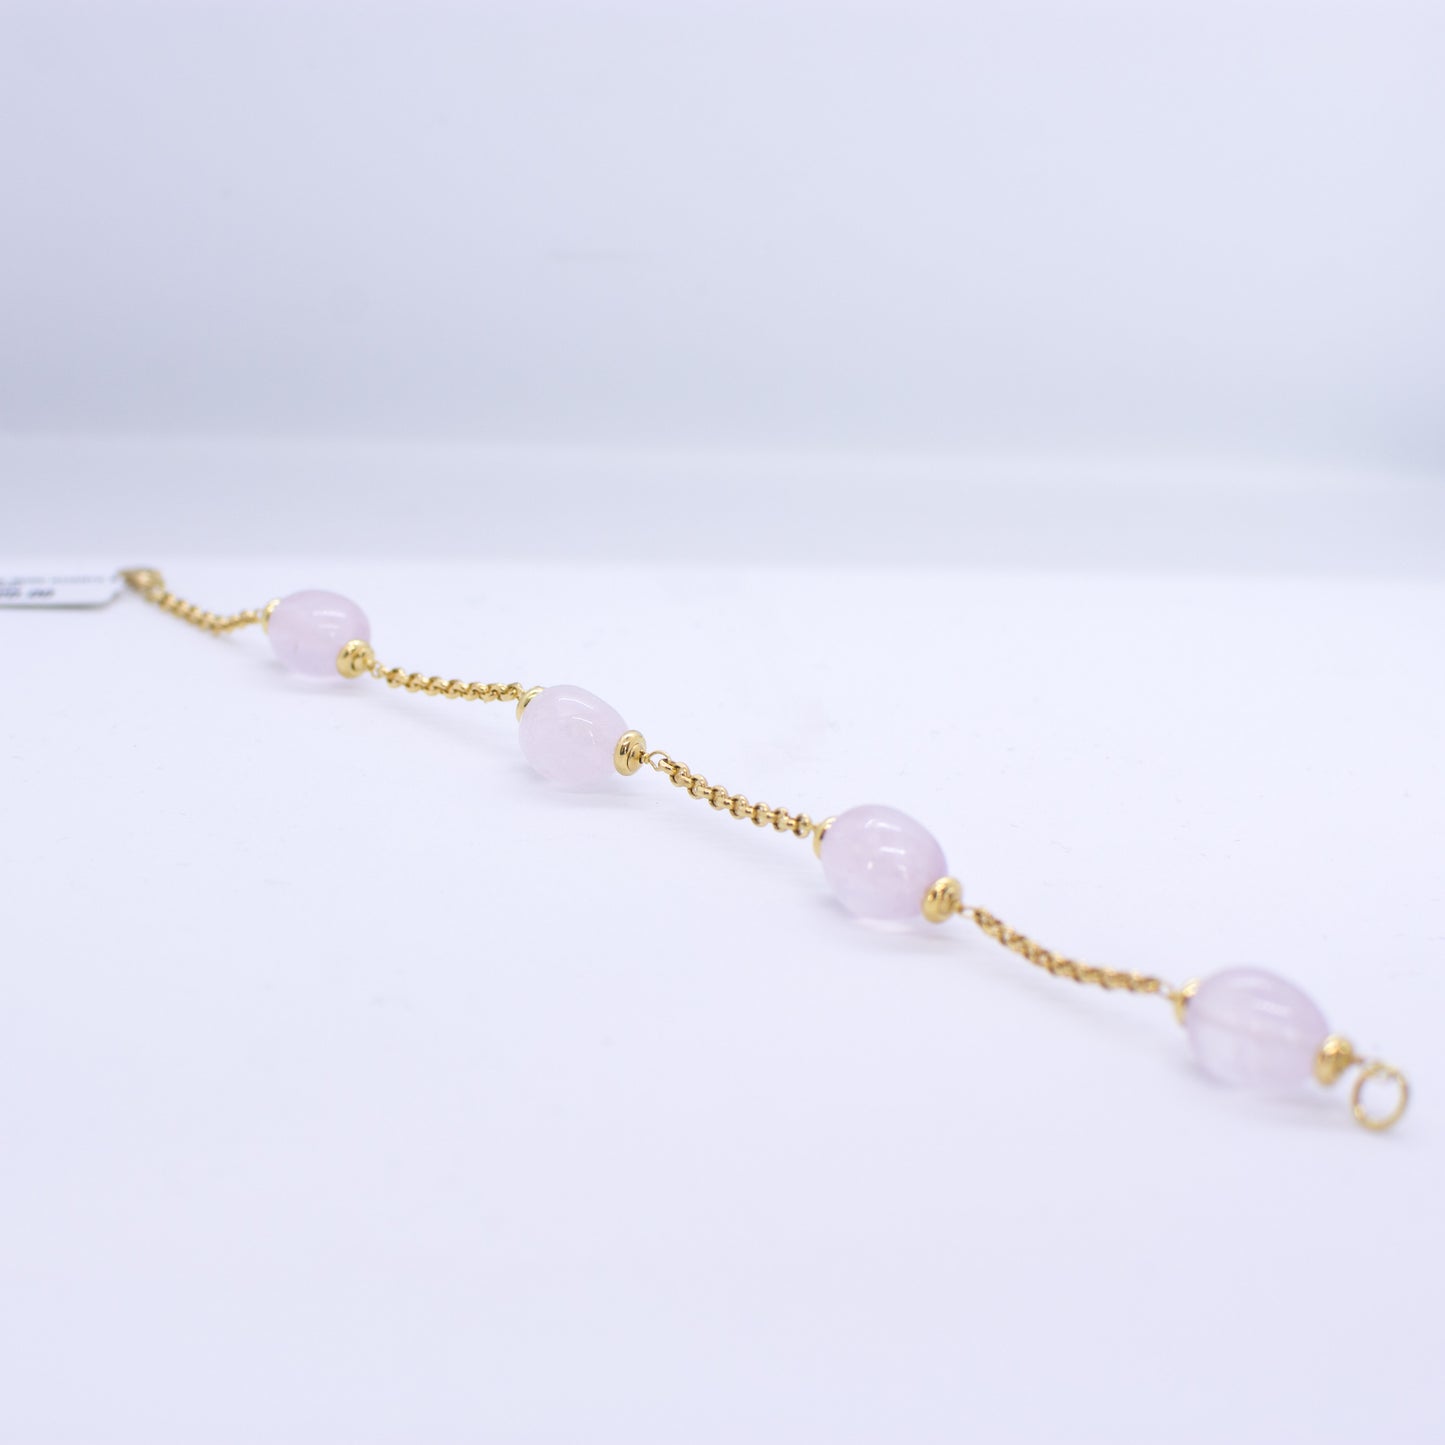 18ct Gold Silky Rose Quartz and Chain Bracelet Rose Quartz dimensions: 10mm x 12mm approximately Diamond cut 2mm gauge solid trace chain 19cm long 18ct yellow gold This item can be ordered in a variety of lengths.  Please contact us for custom requirements.